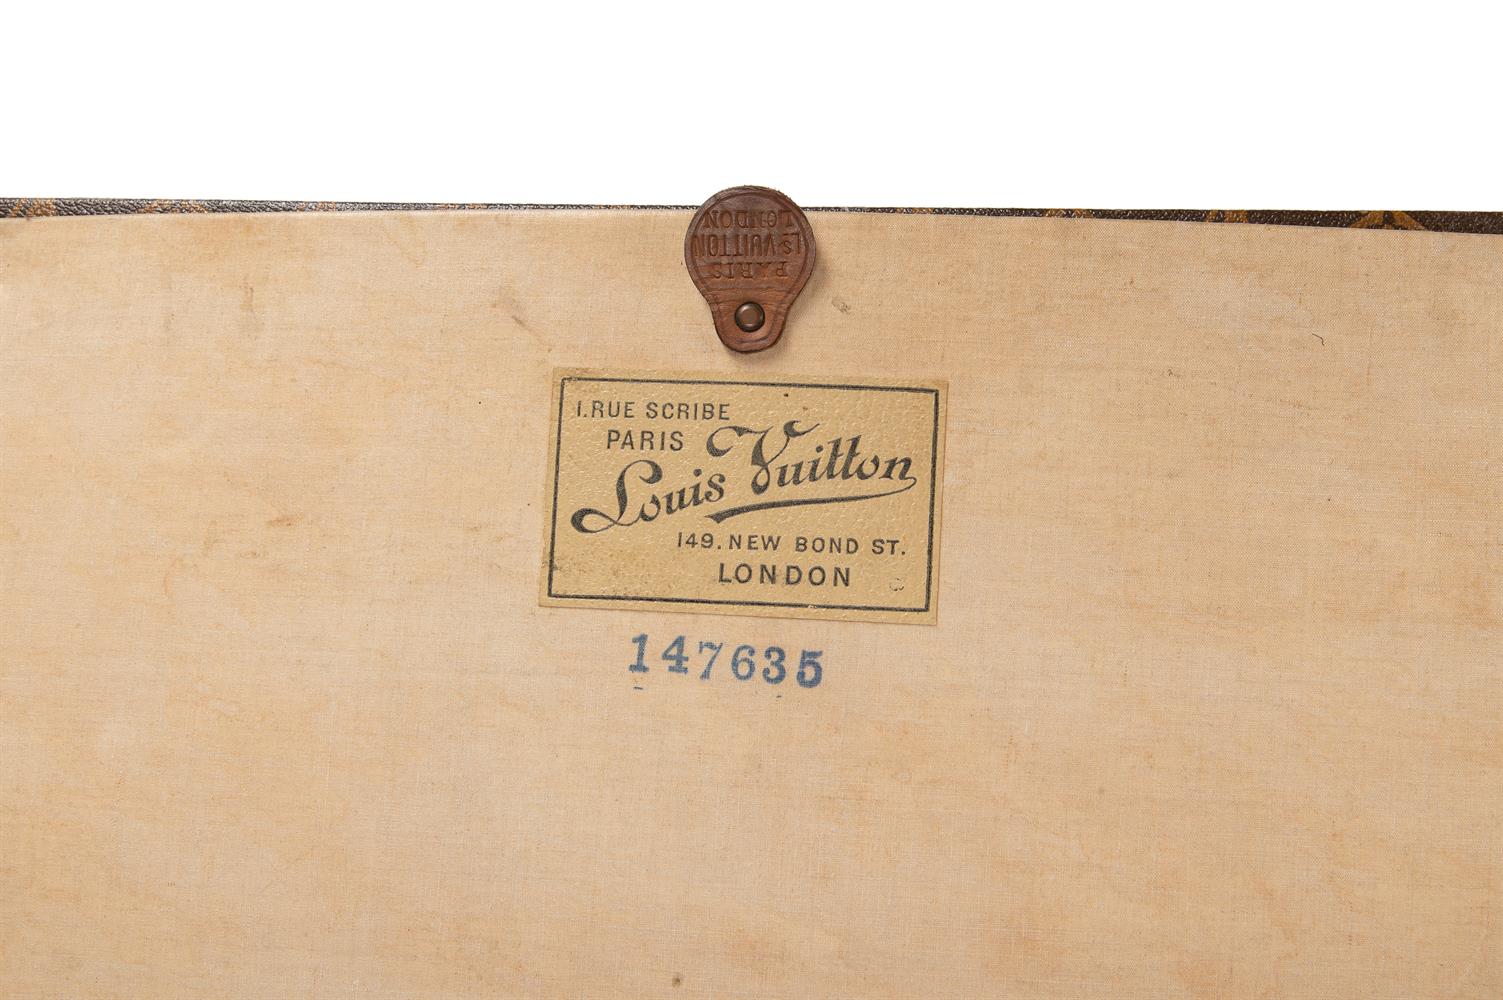 LOUIS VUITTON, A MONOGRAMMED COATED CANVAS HARD TRAVELLING TRUNK - Image 3 of 4